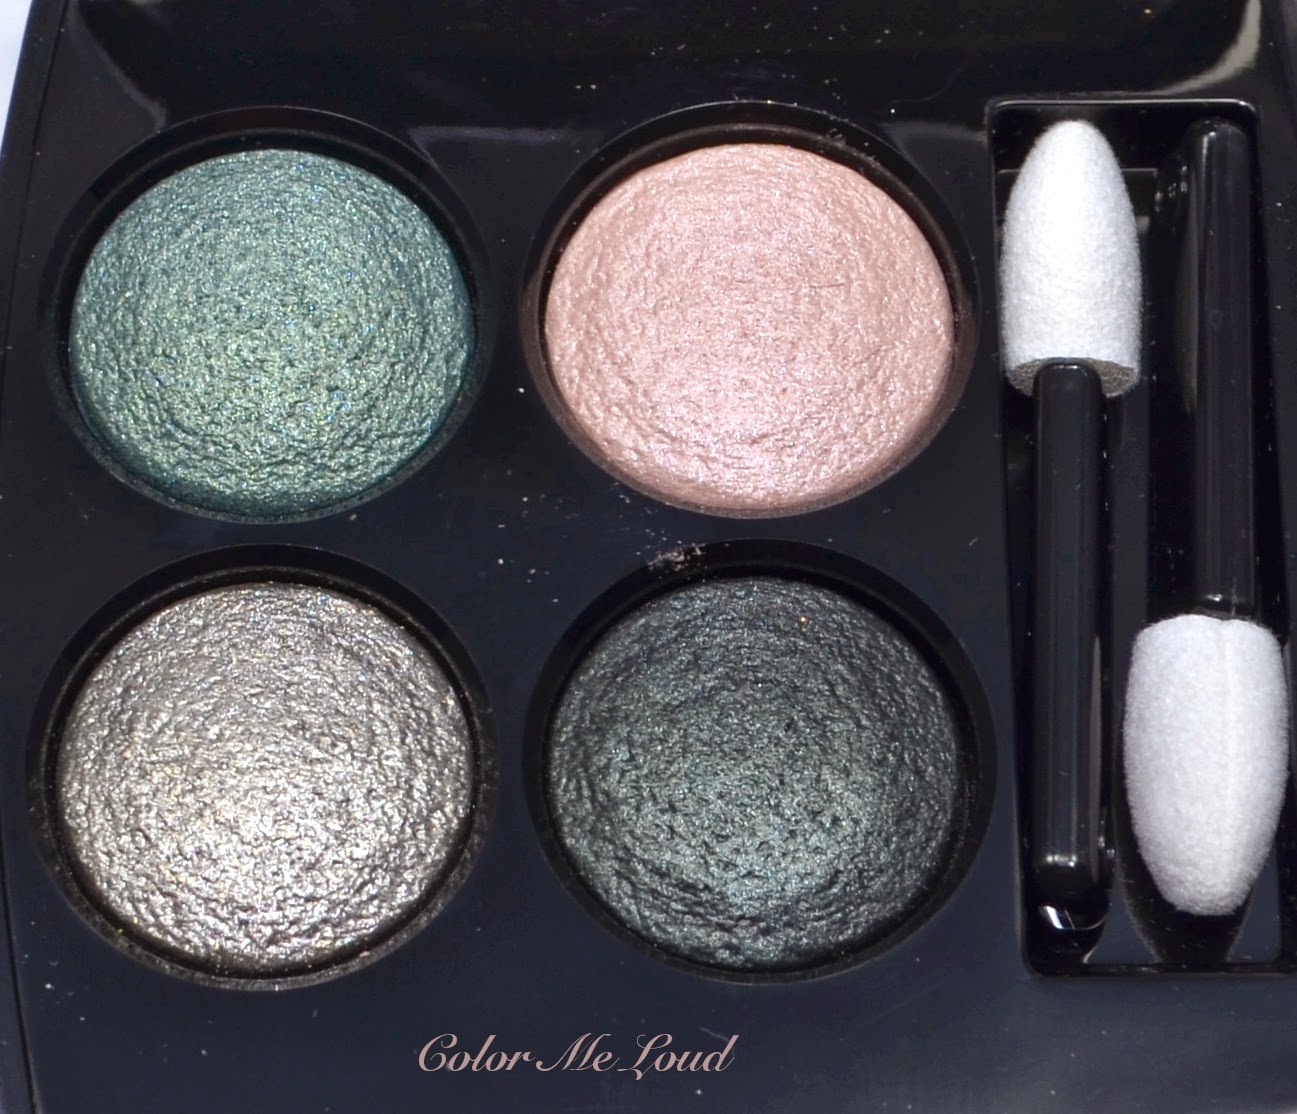 Chanel Warm Memories (354) Les 4 Ombres Eyeshadow Quad Review & Swatches